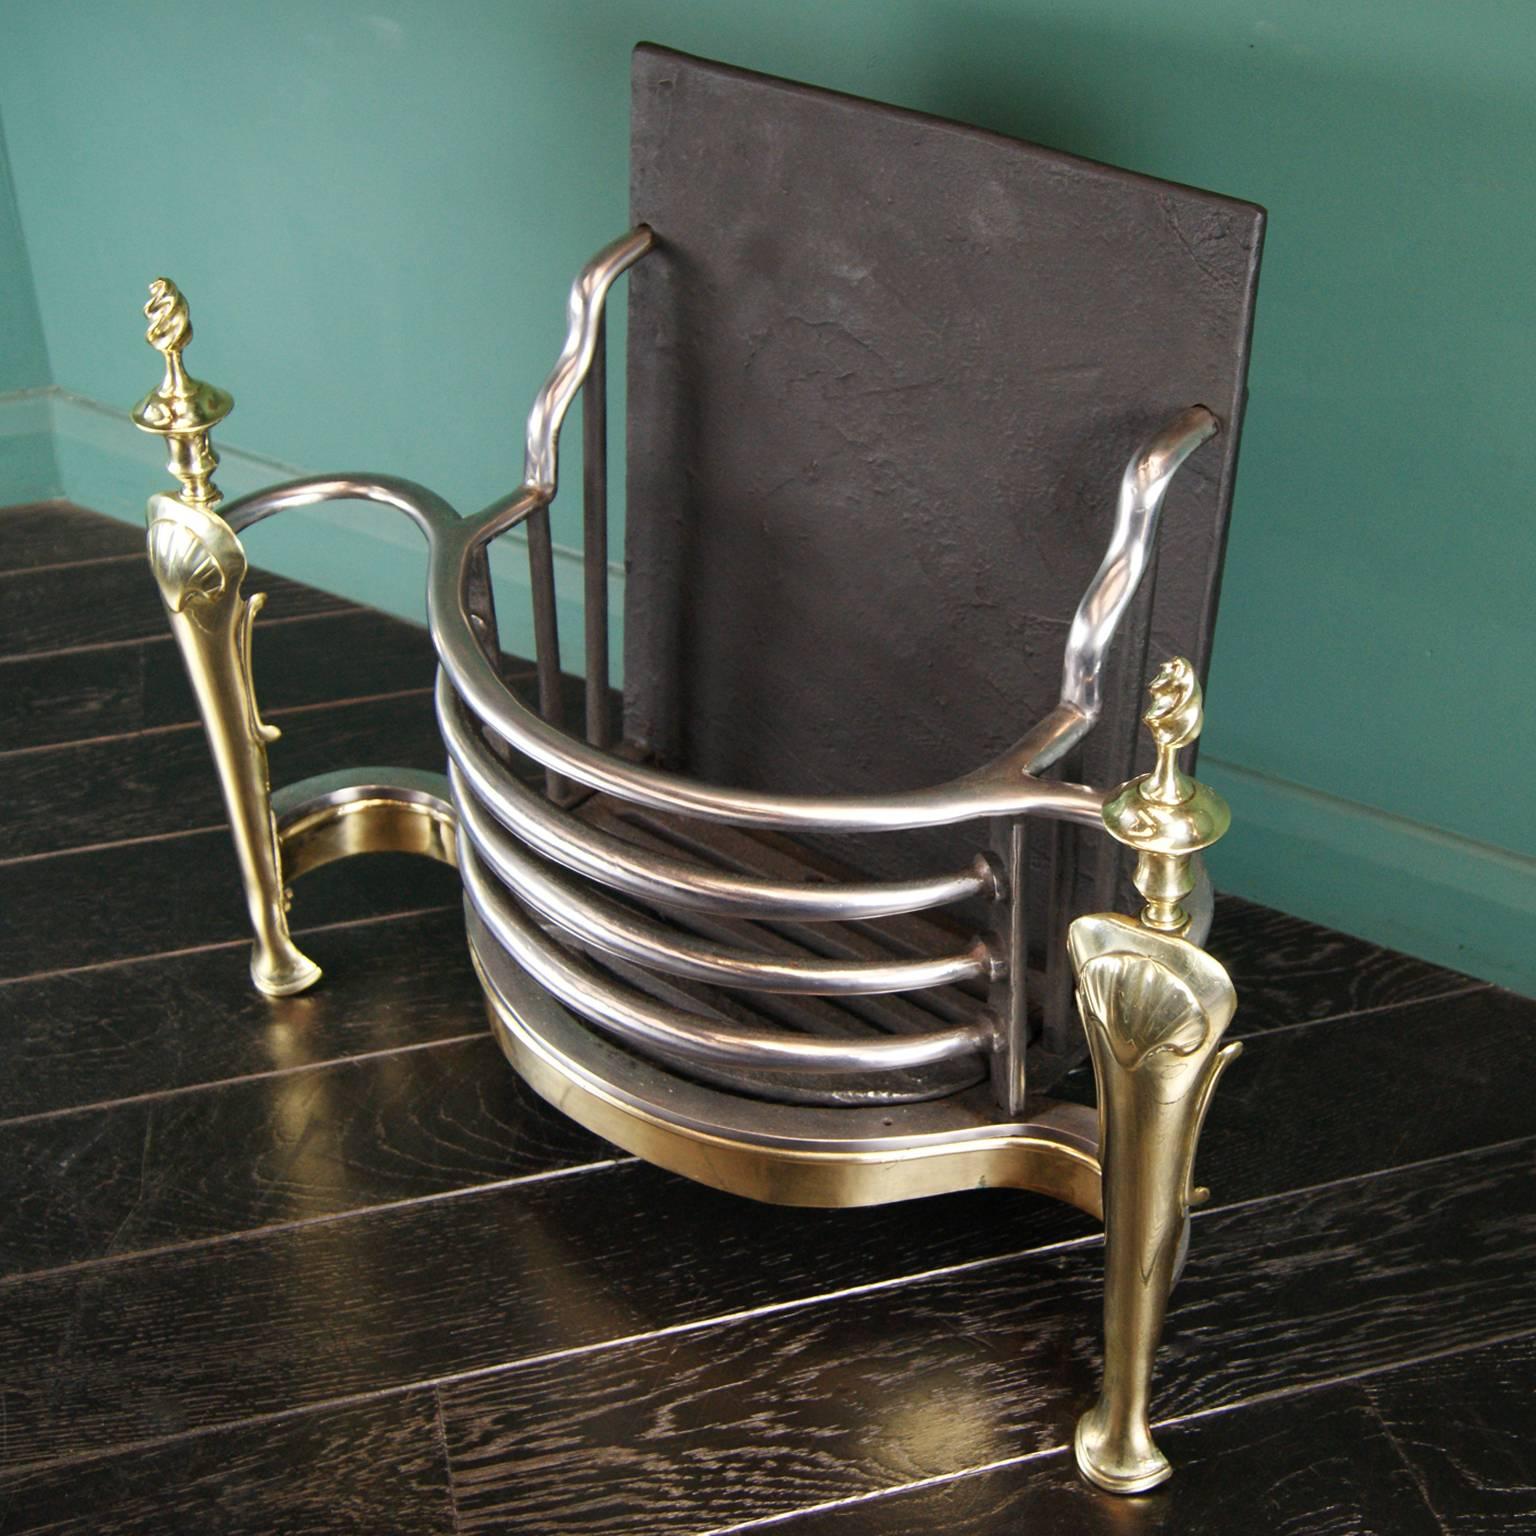 An elegant 19th century English brass and wrought-iron fire basket in the Queen Anne style, with cabriole legs, twist-top finials and a brass apron.